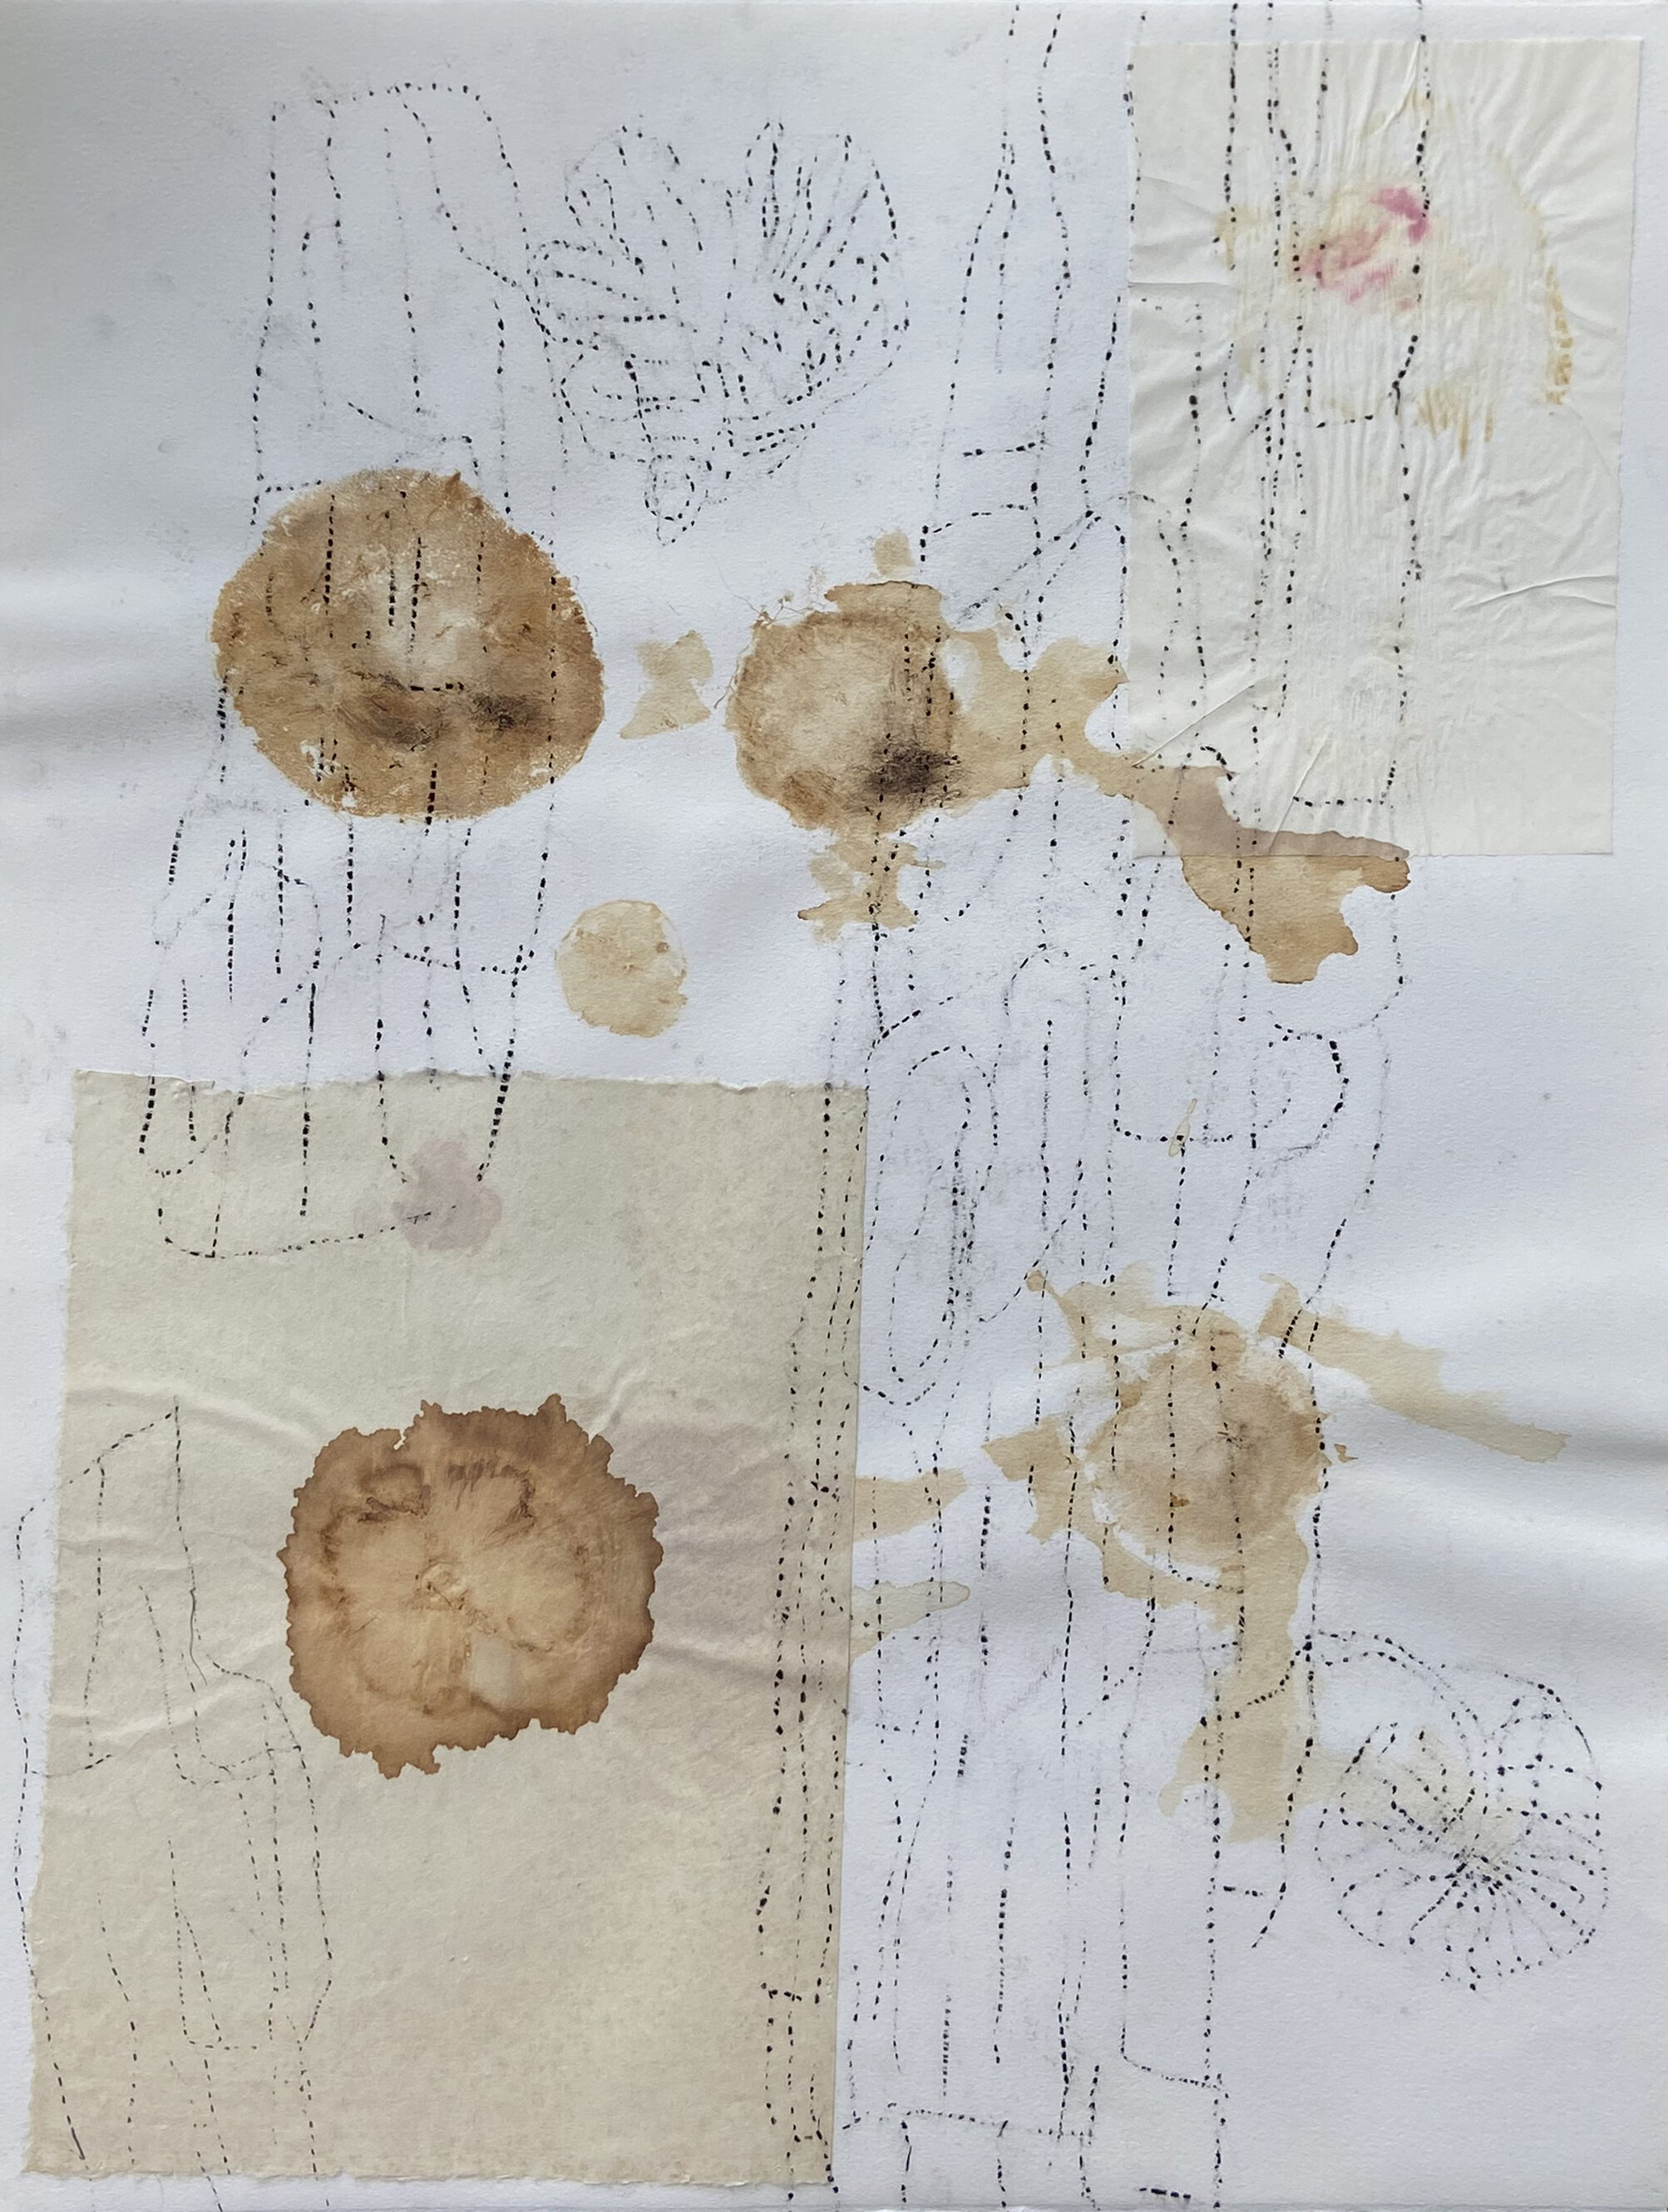    Trace Layers No. 25  , 2008 Mushroom stains, charcoal, and rice paper on archival paper 26 x 18 in. 